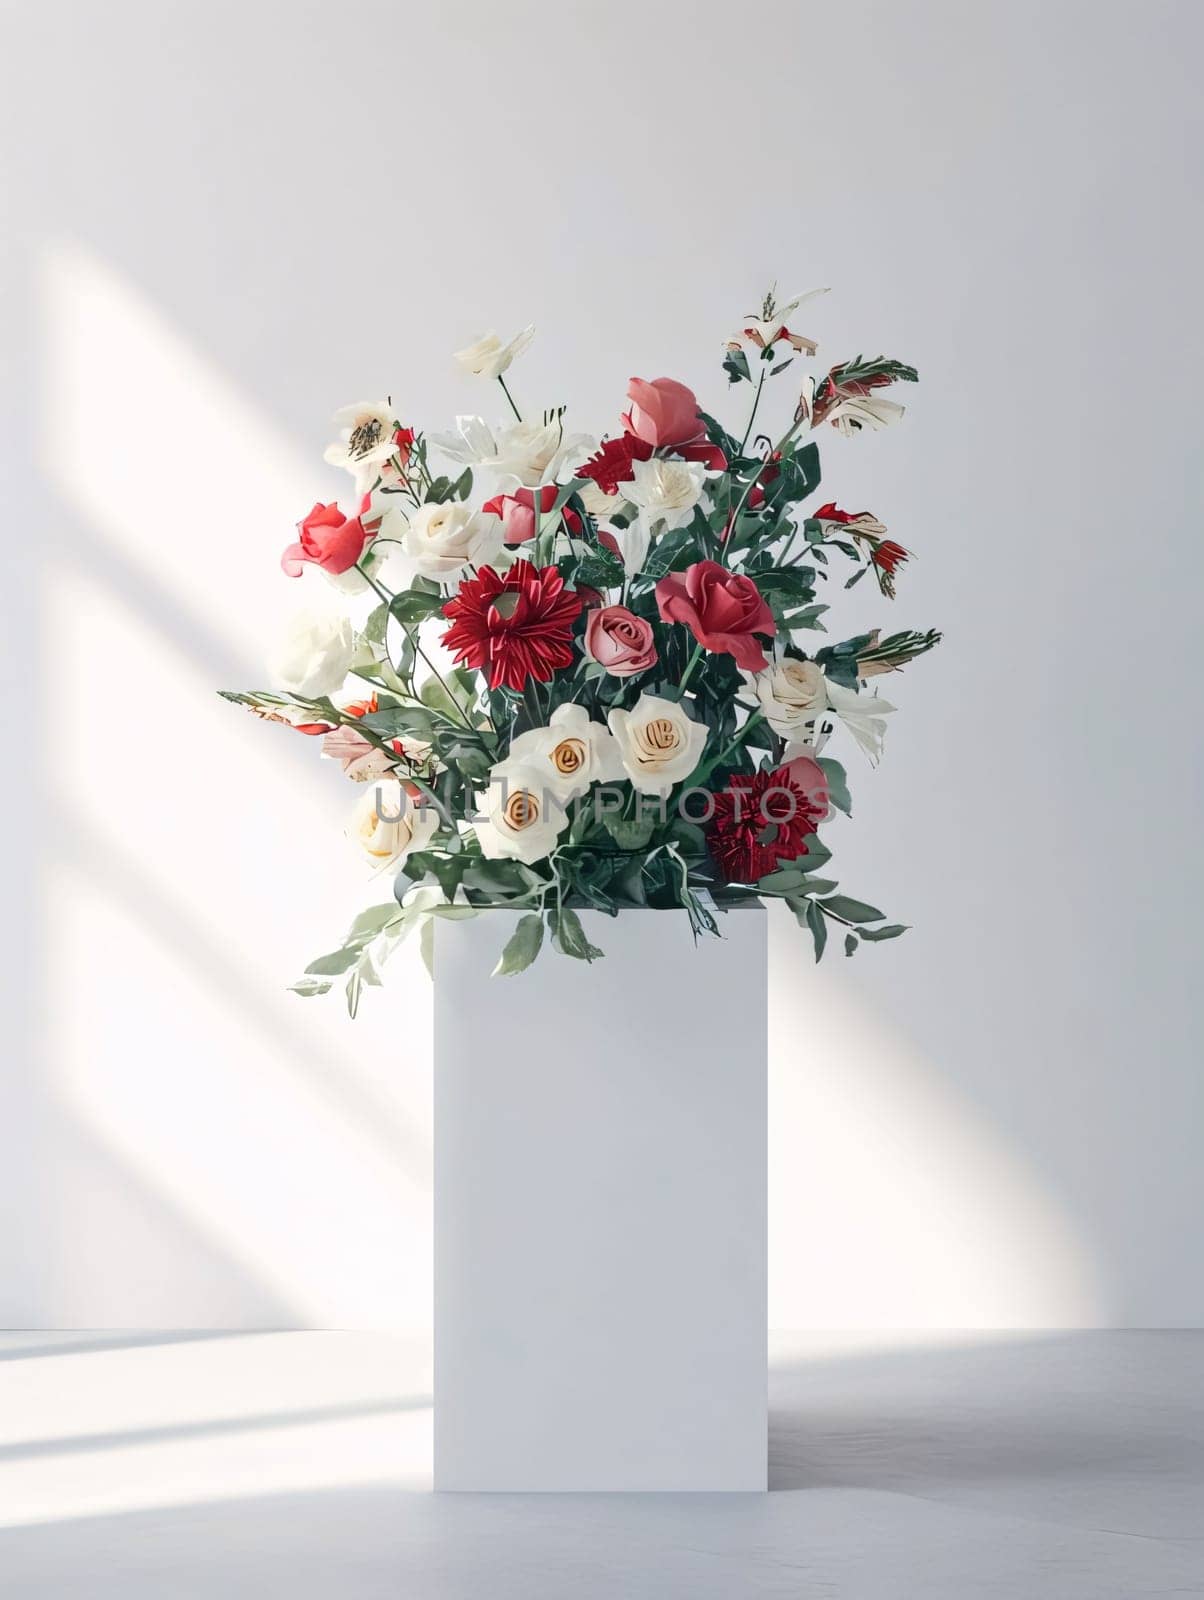 Bouquet of white and red flowers with green leaves in a square vase on a white background. Flowering flowers, a symbol of spring, new life. by ThemesS